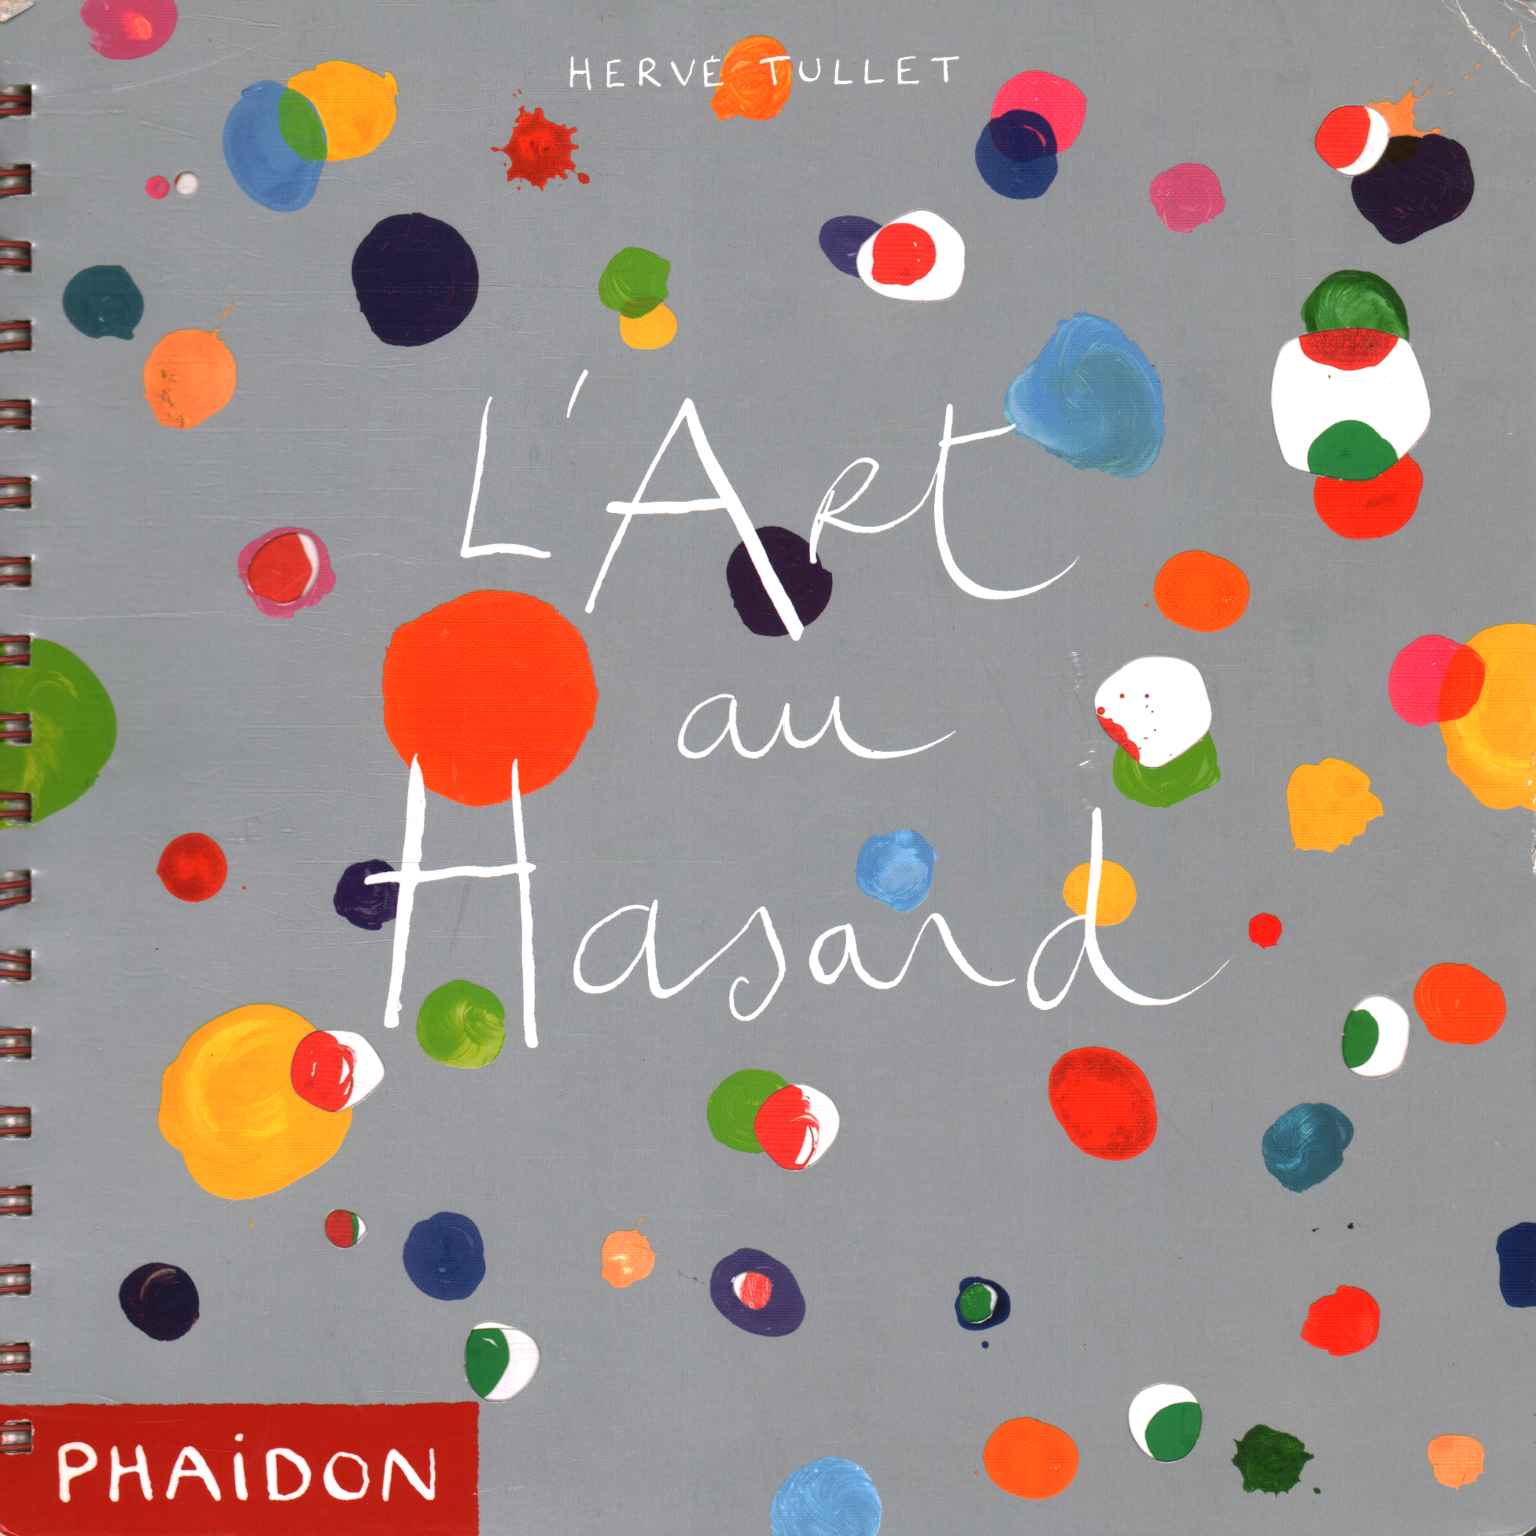 Books - Children's/young people's books - Childhood, L'Art au Hasard